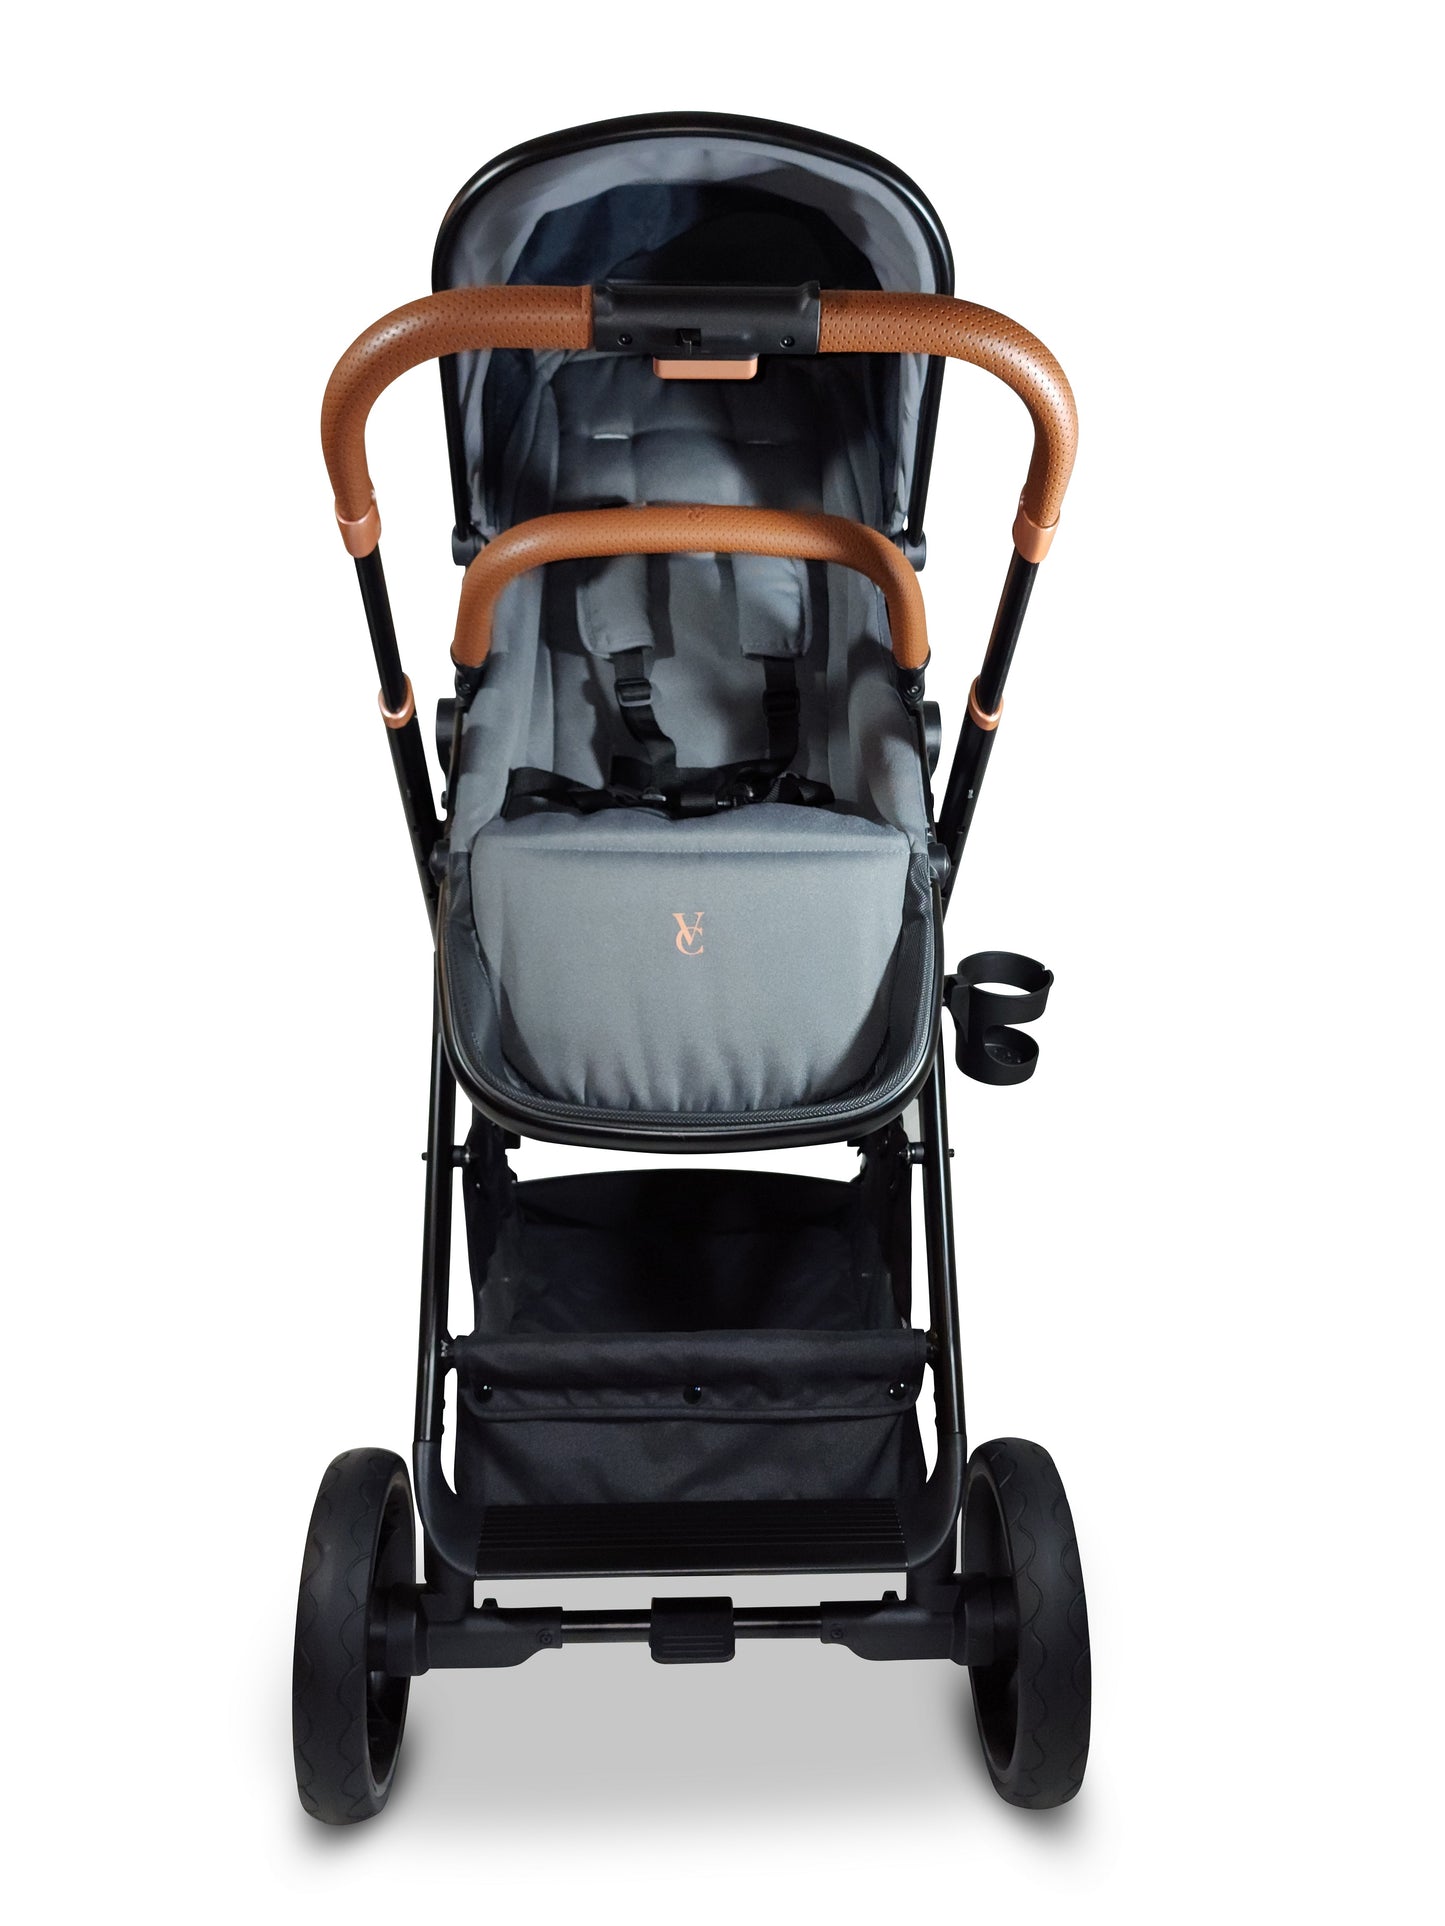 VENTURA SINGLE TO DOUBLE SIT AND STAND STROLLER